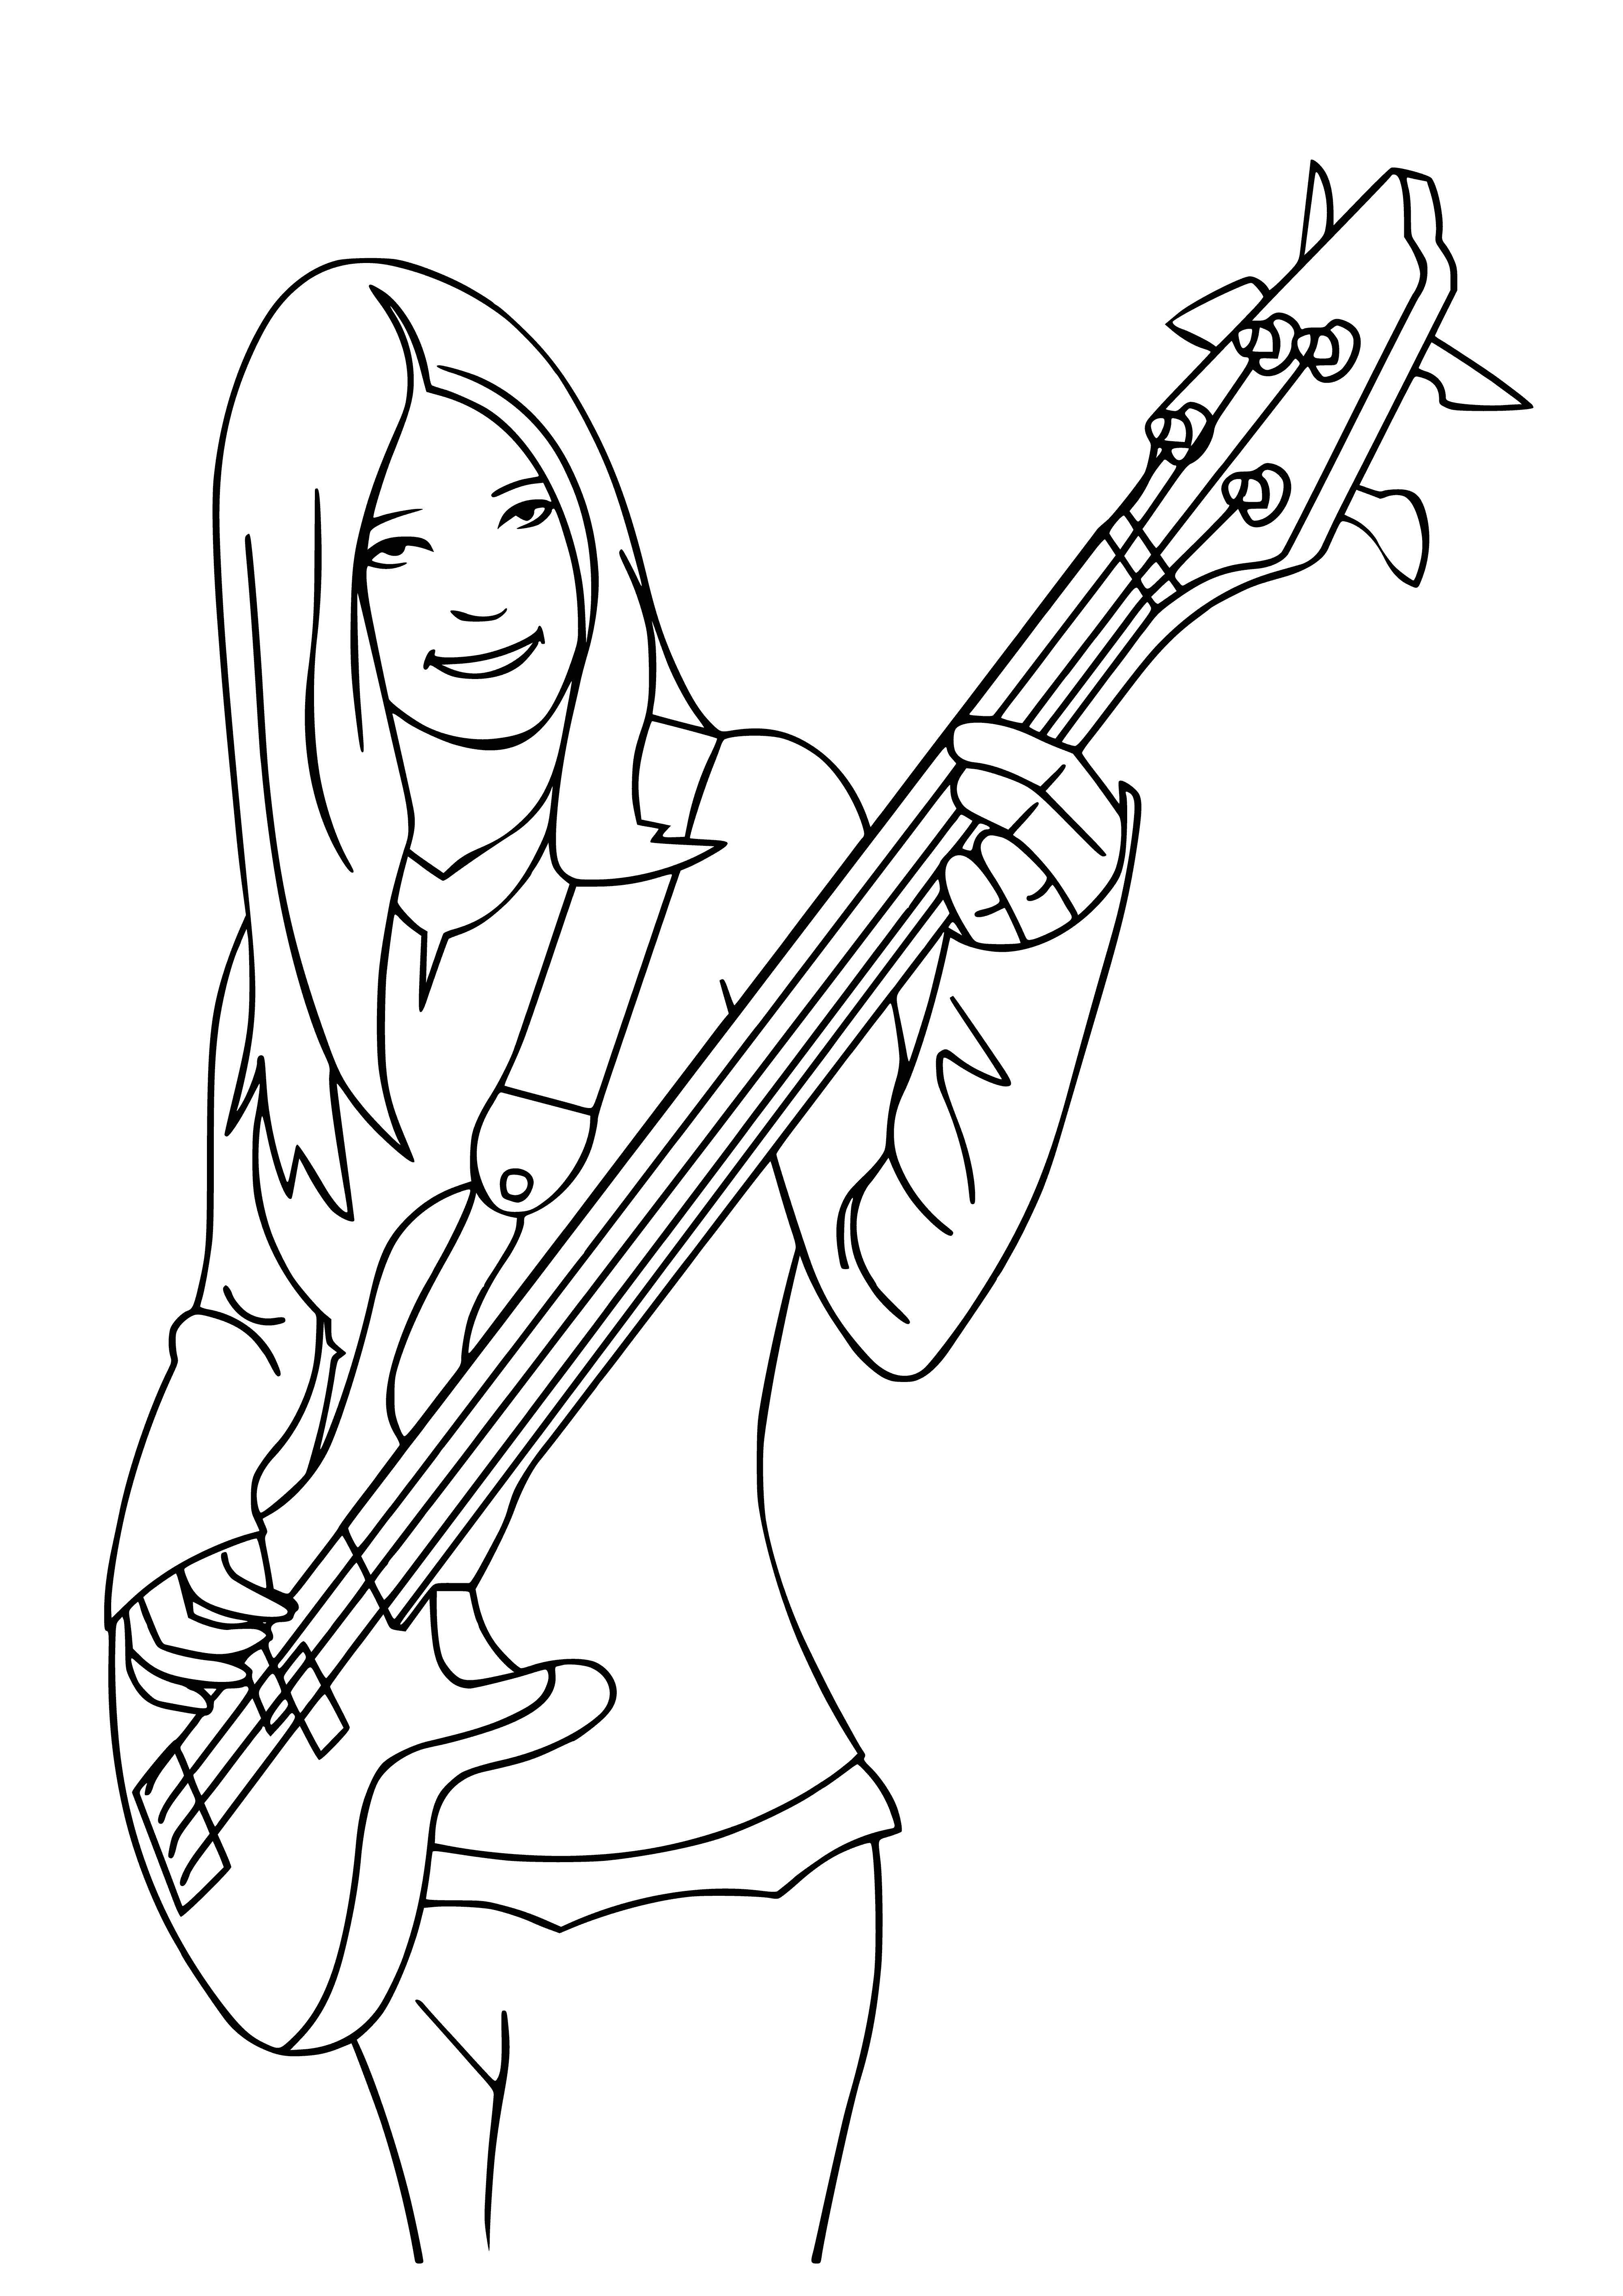 coloring page: Person playing guitar in a blue shirt, with a brown guitar and a strap. Hand on the neck and strings strumming away. #toneitup